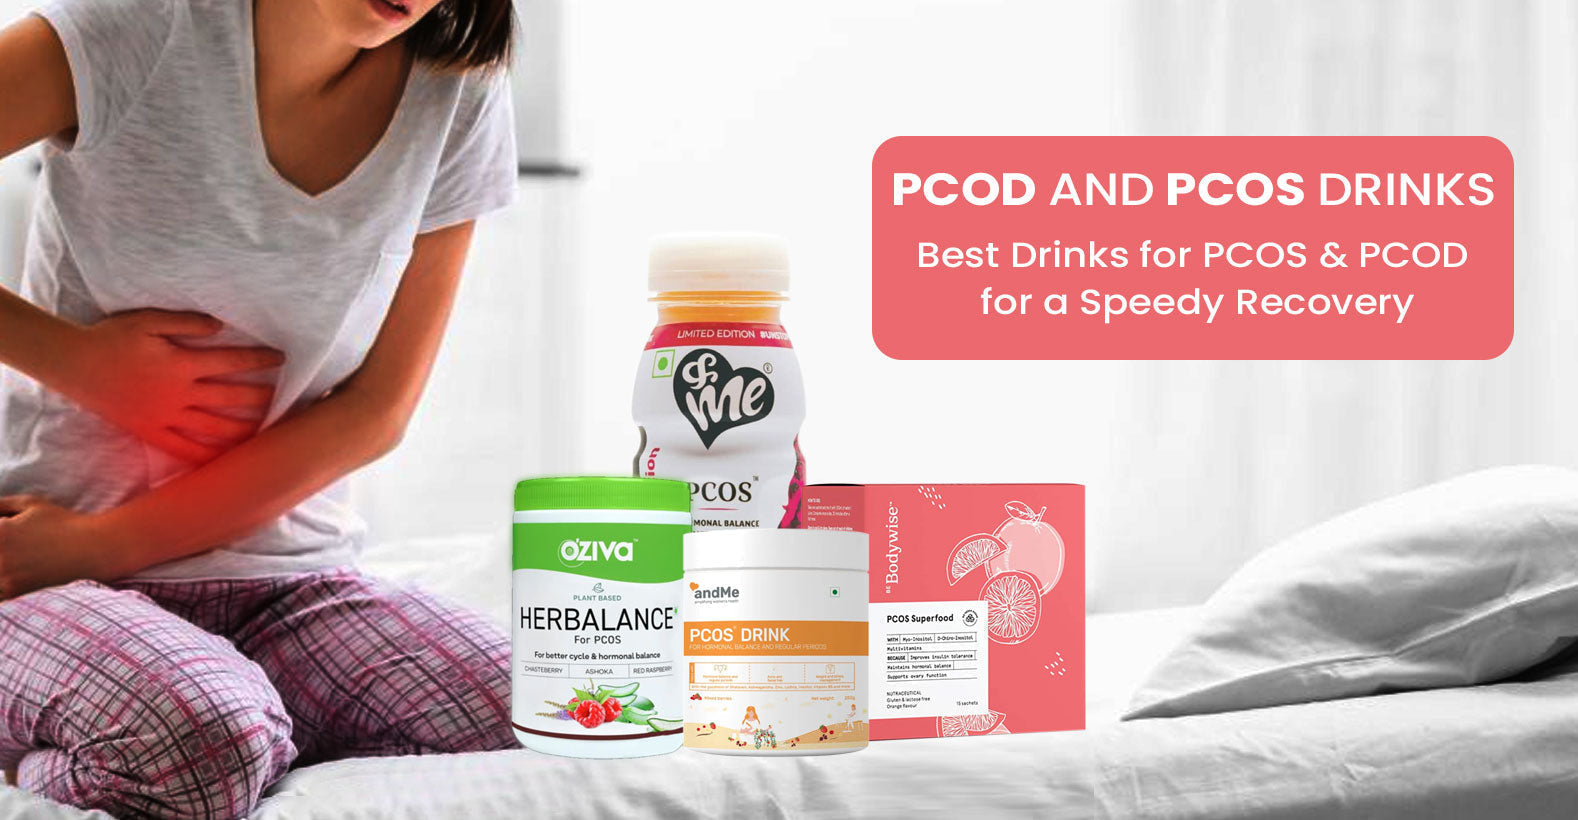 PCOS/PCOD Drinks